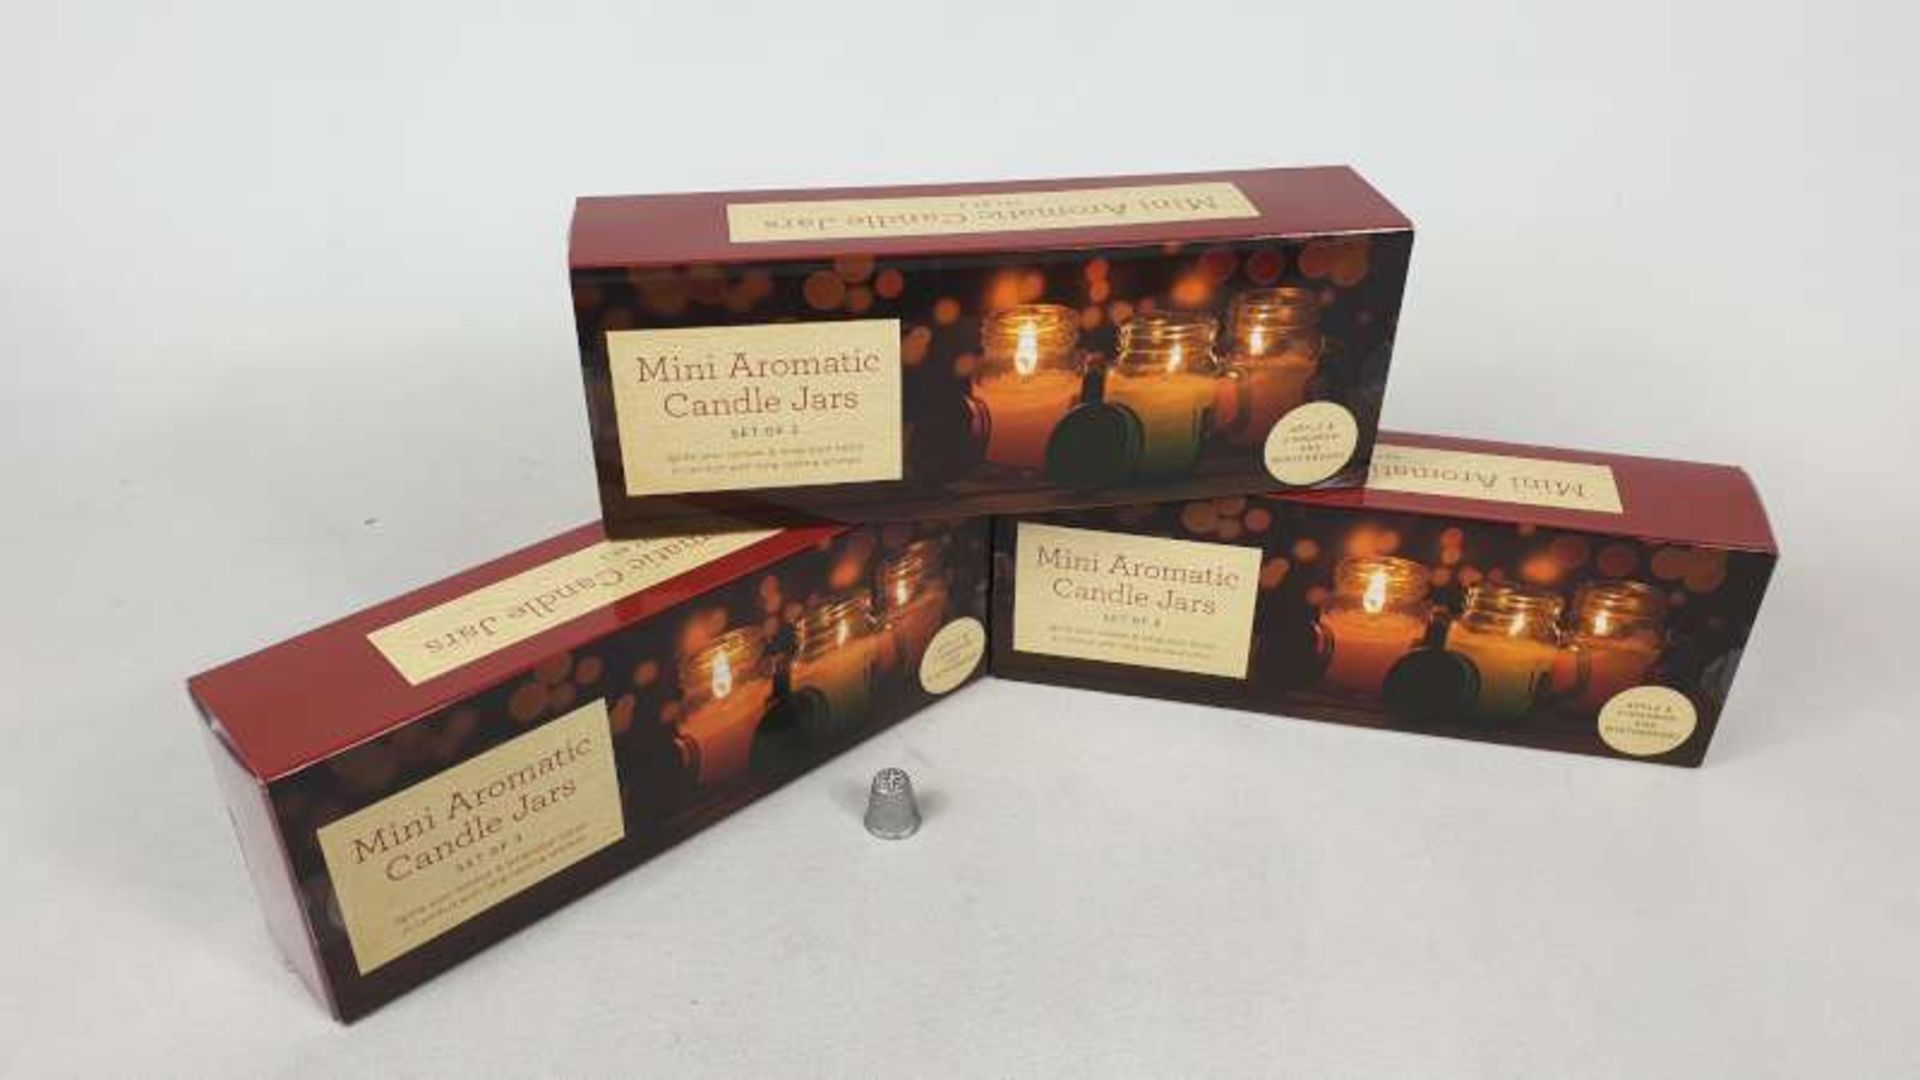 48 X SETS OF 3 MINI AROMATIC CANDLE JARS IN 4 BOXES